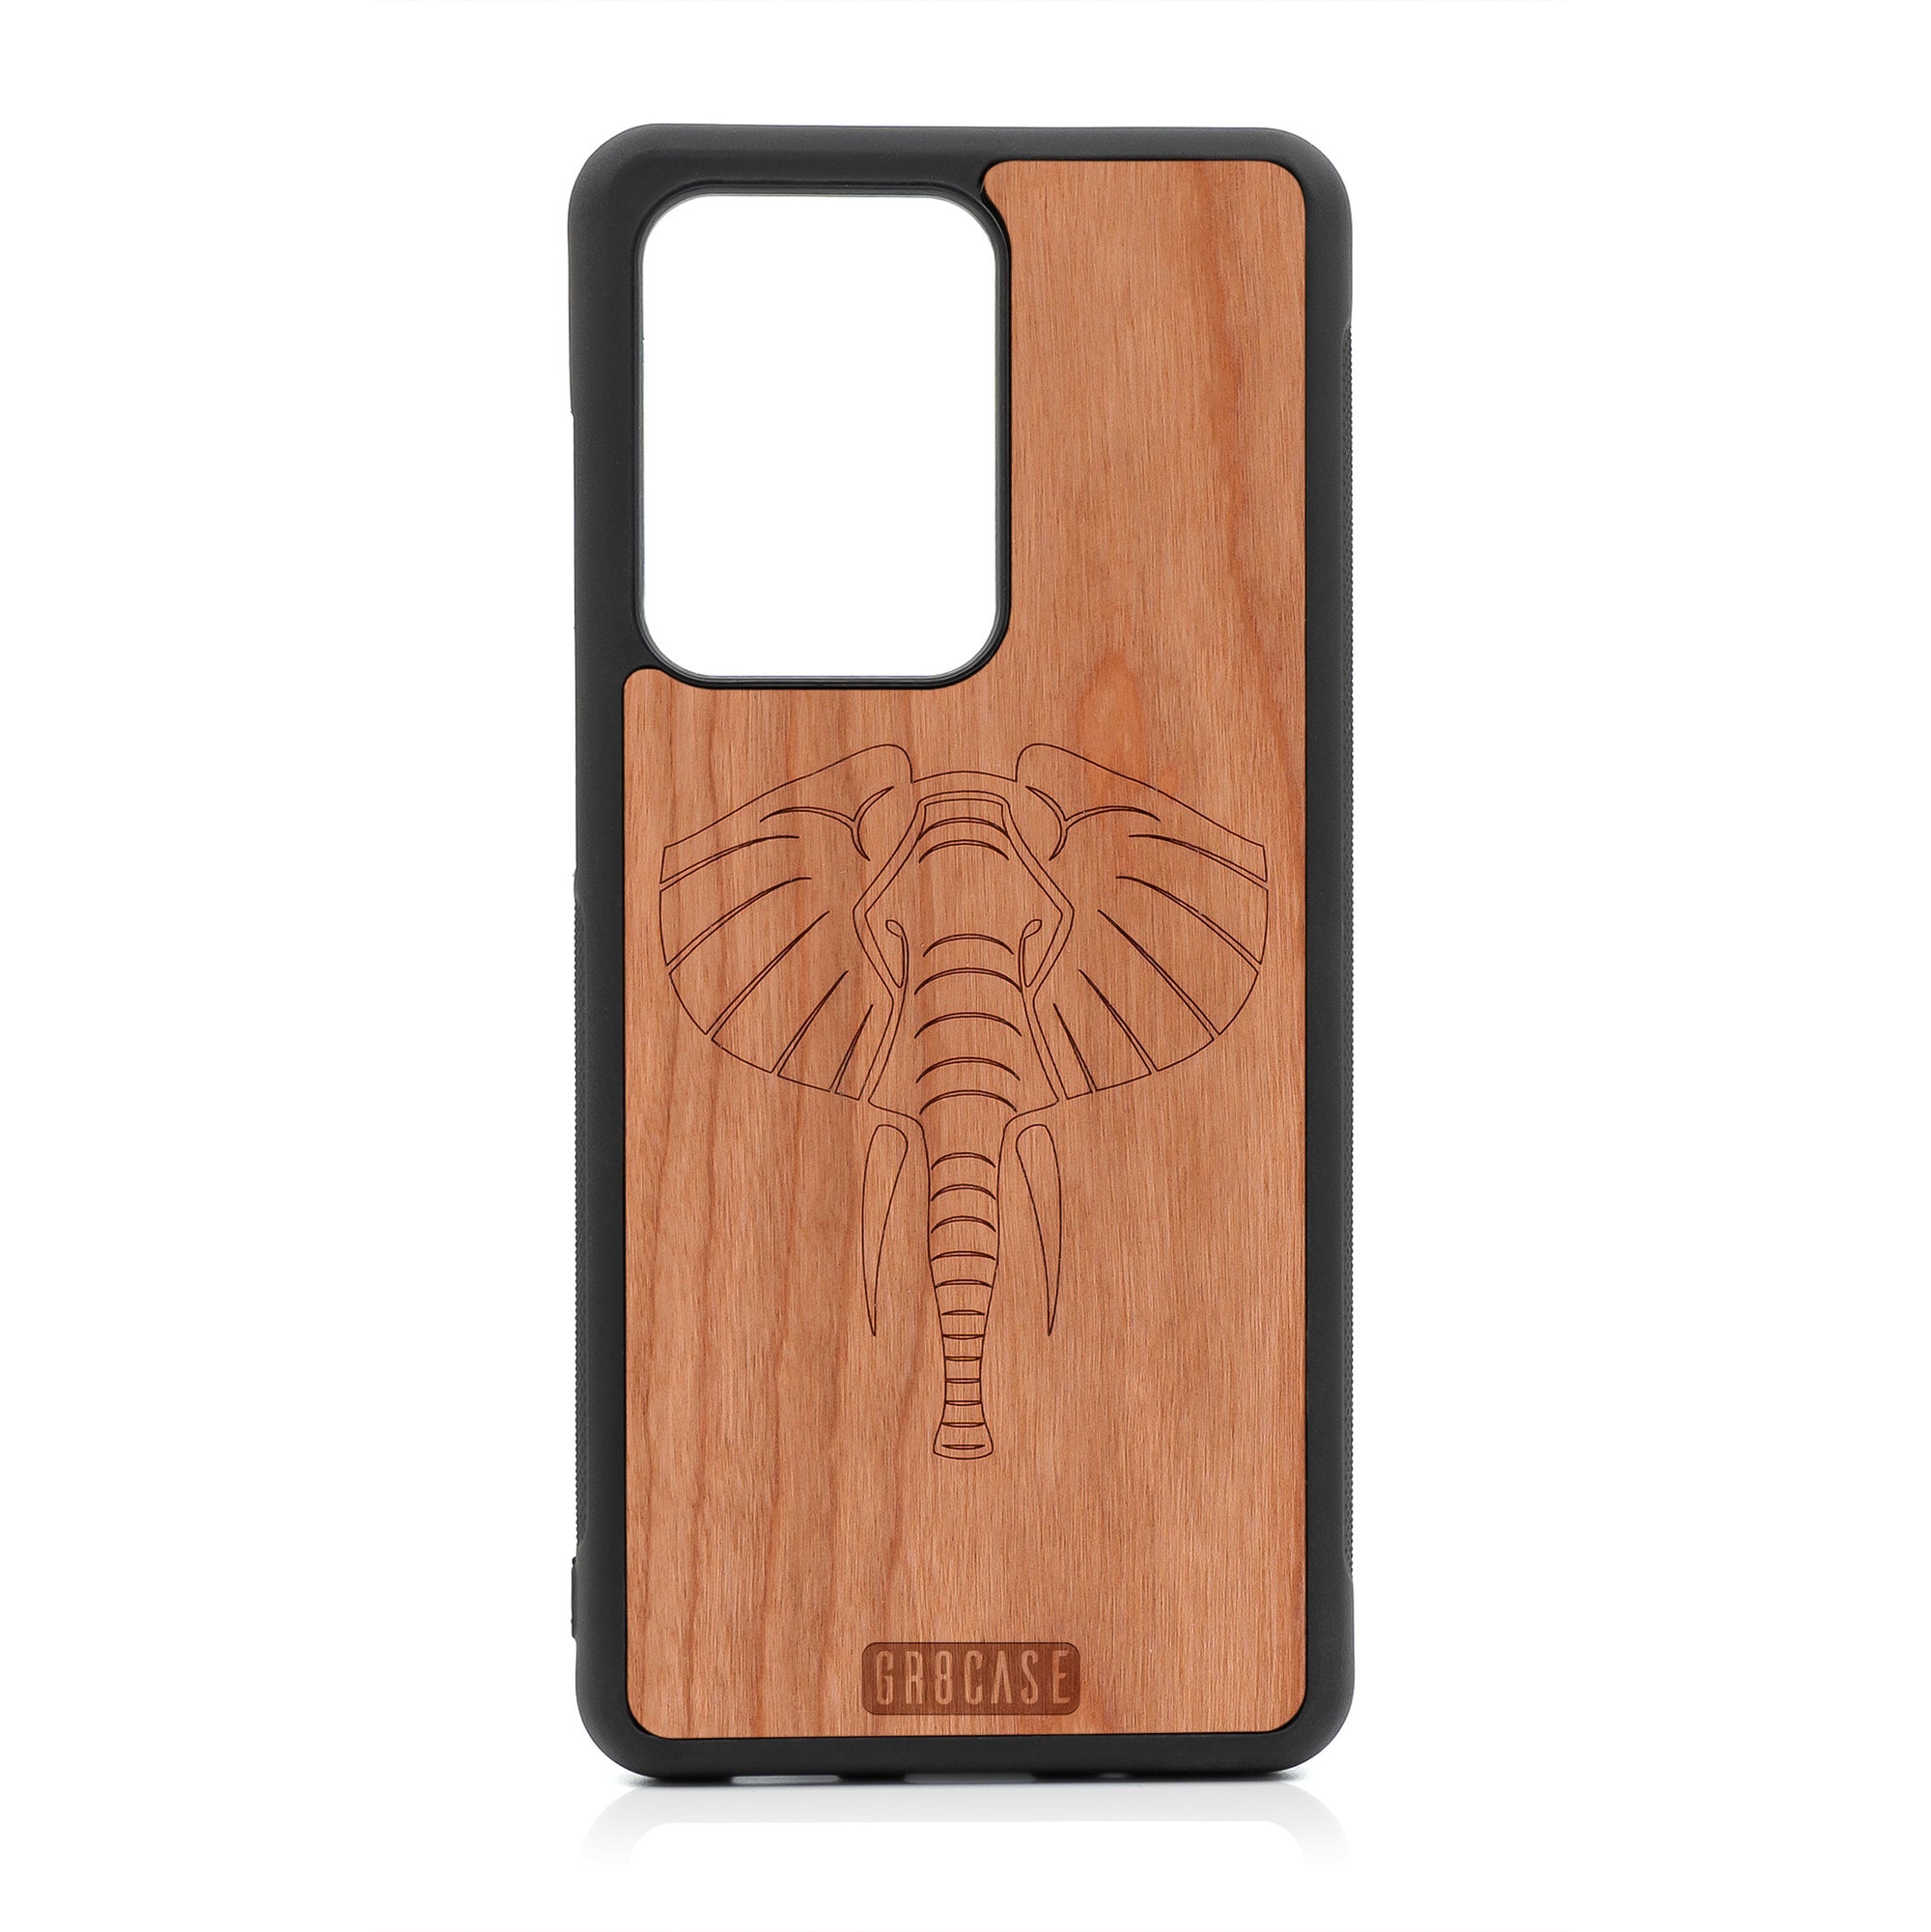 Elaphant Design Wood Case For Samsung Galaxy S20 Ultra by GR8CASE